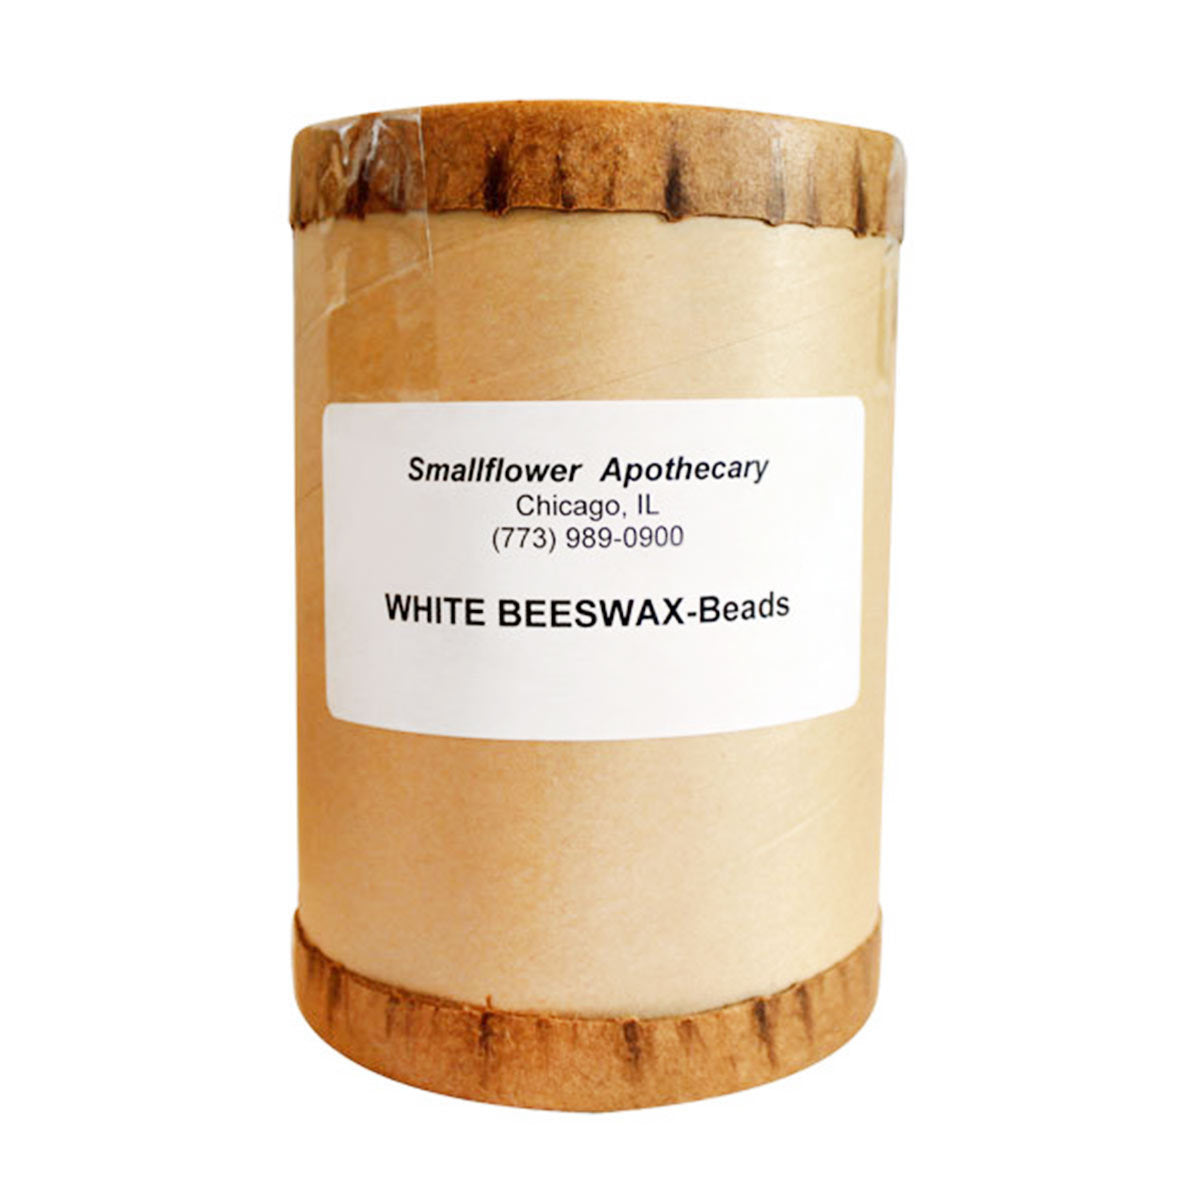 Primary image of White Beeswax